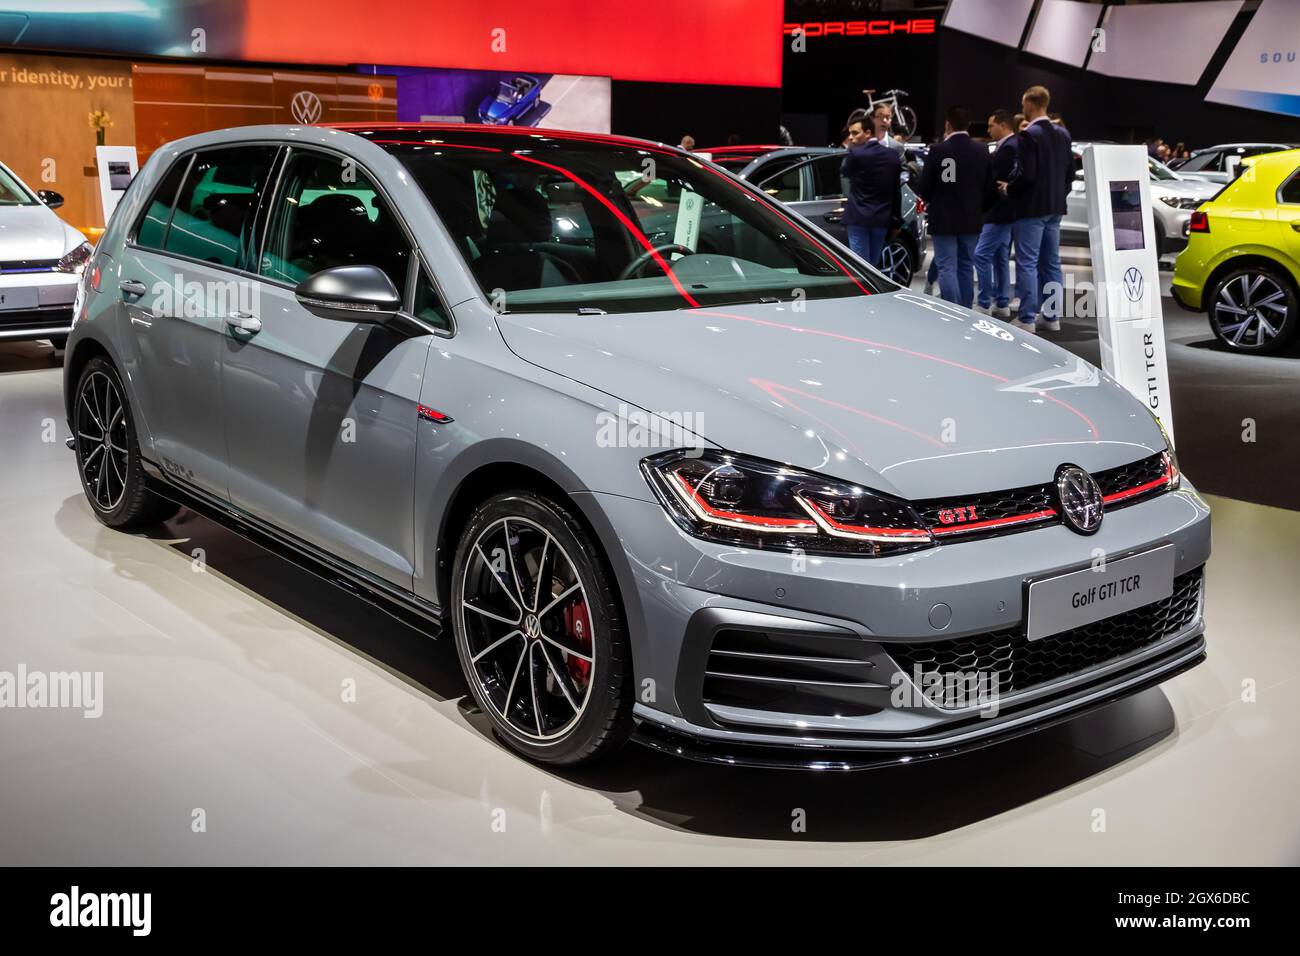 Volkswagen Golf GTI TCR car showcased at the Autosalon 2020 Motor Show.  Brussels, Belgium - January 9, 2020 Stock Photo - Alamy